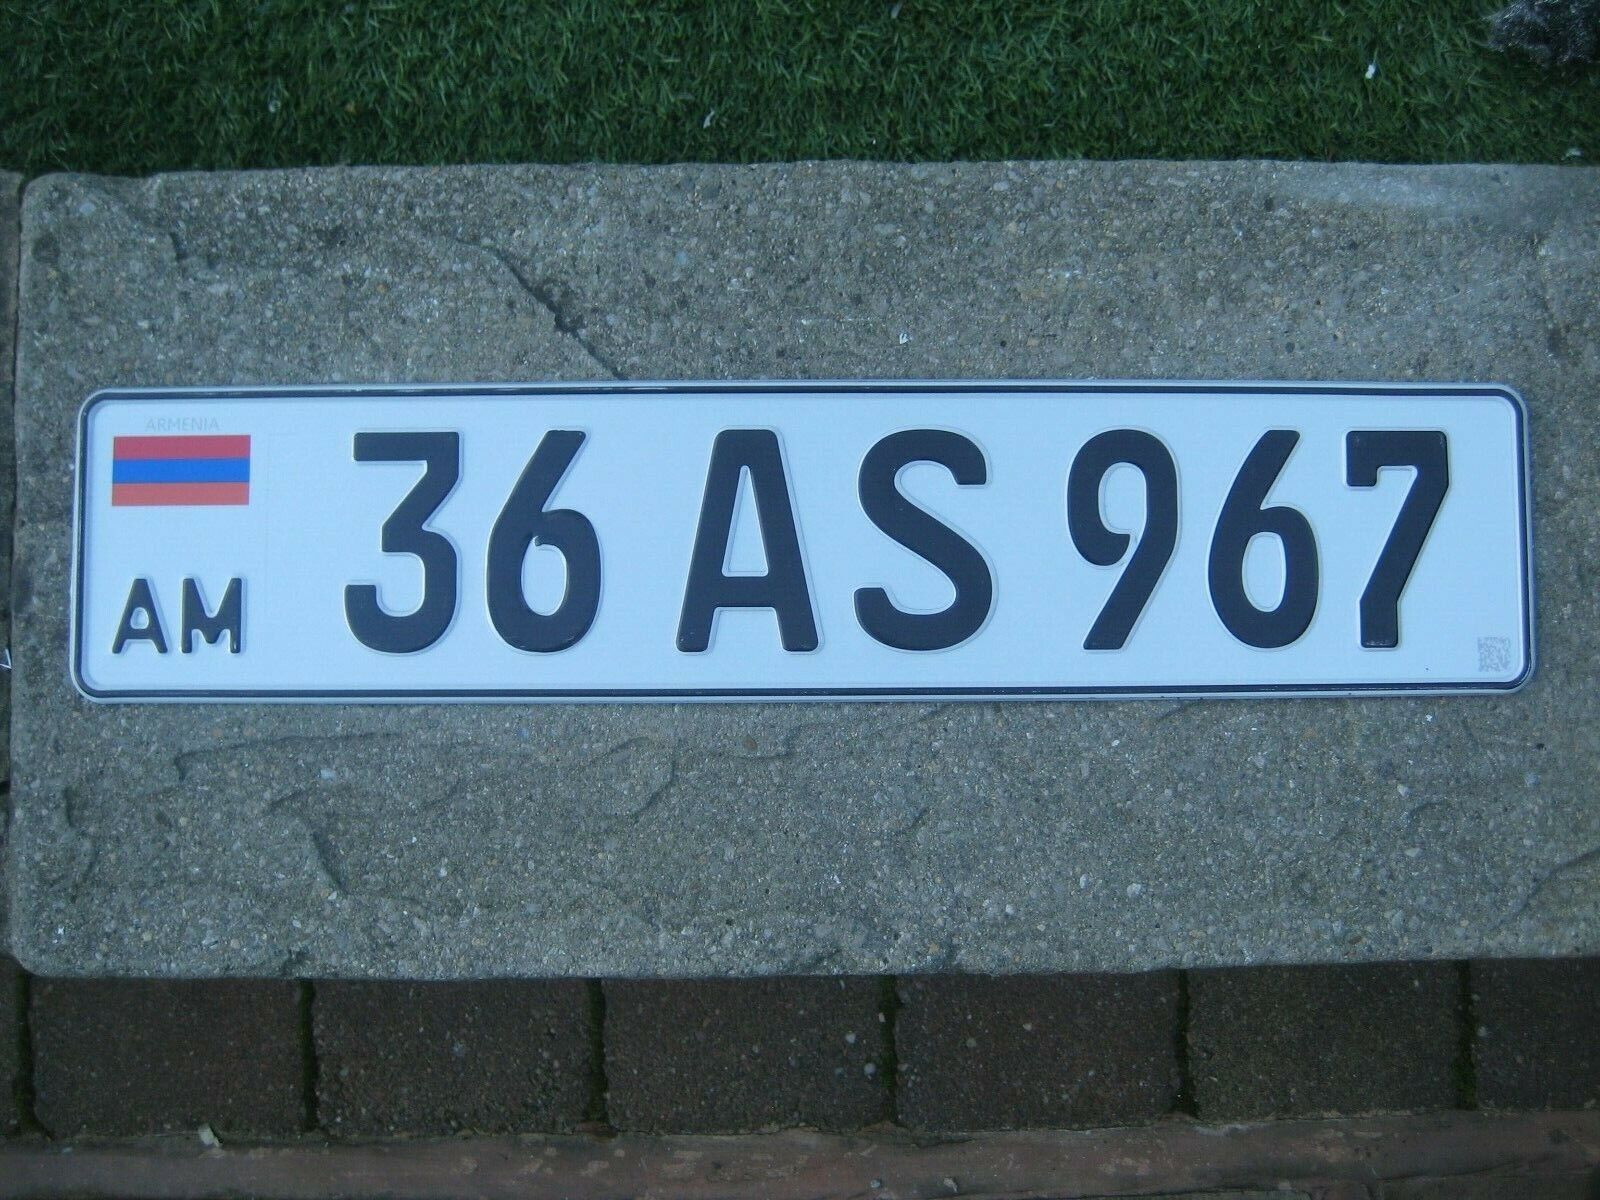 ARMENIA LORI WITH COUNTRY FLAG # 36 AS 967 WITH HOLOGRAM RARE LICENSE PLATE